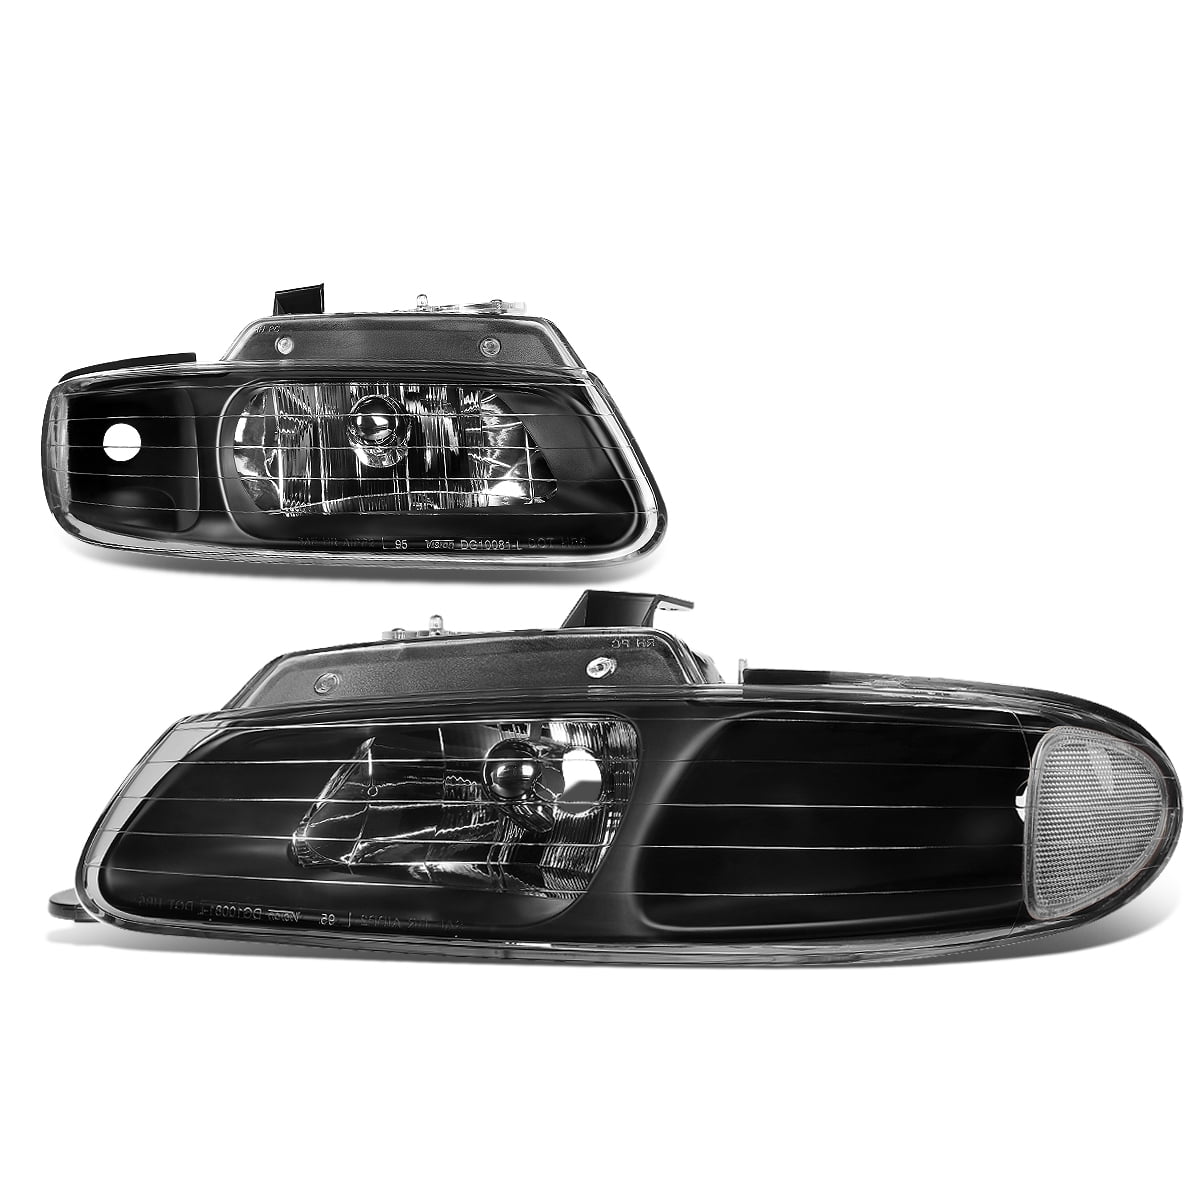 For 96-00 Dodge Caravan 96-00 Chrysler Town and Country 96-00 Plymouth Voyager Van Headlight Assembly Chrome Housing Headlamp Replacement Set, without Quad Lamps 